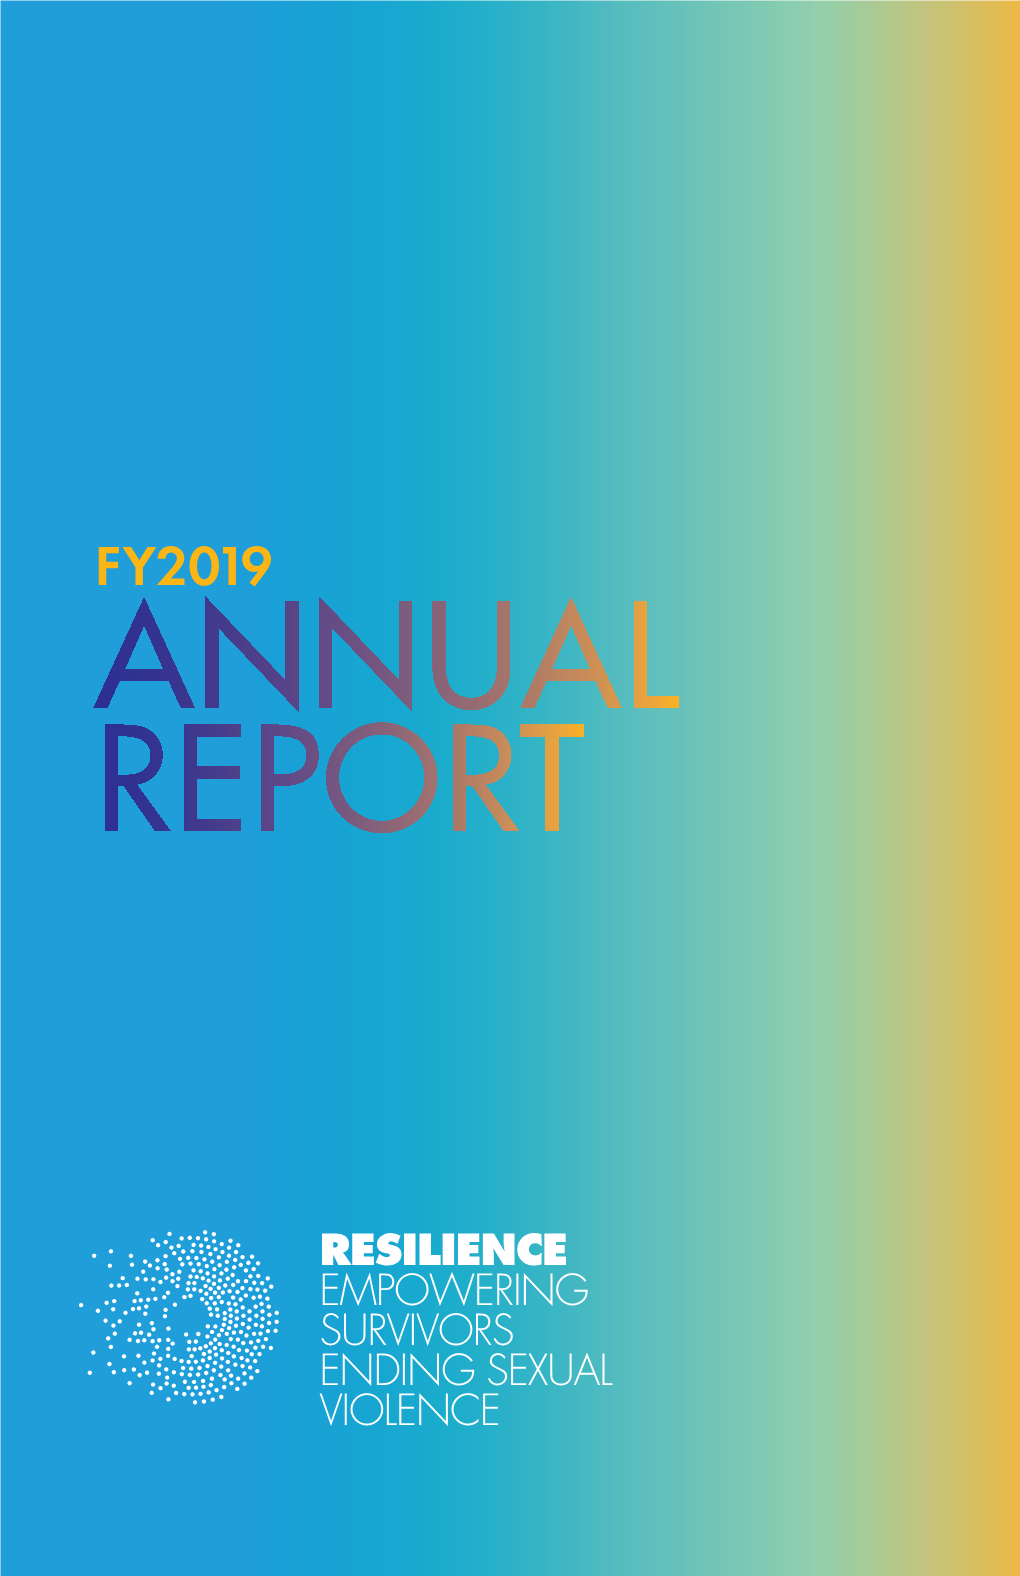 Or on the Image Below to Read Our 2019 Annual Report